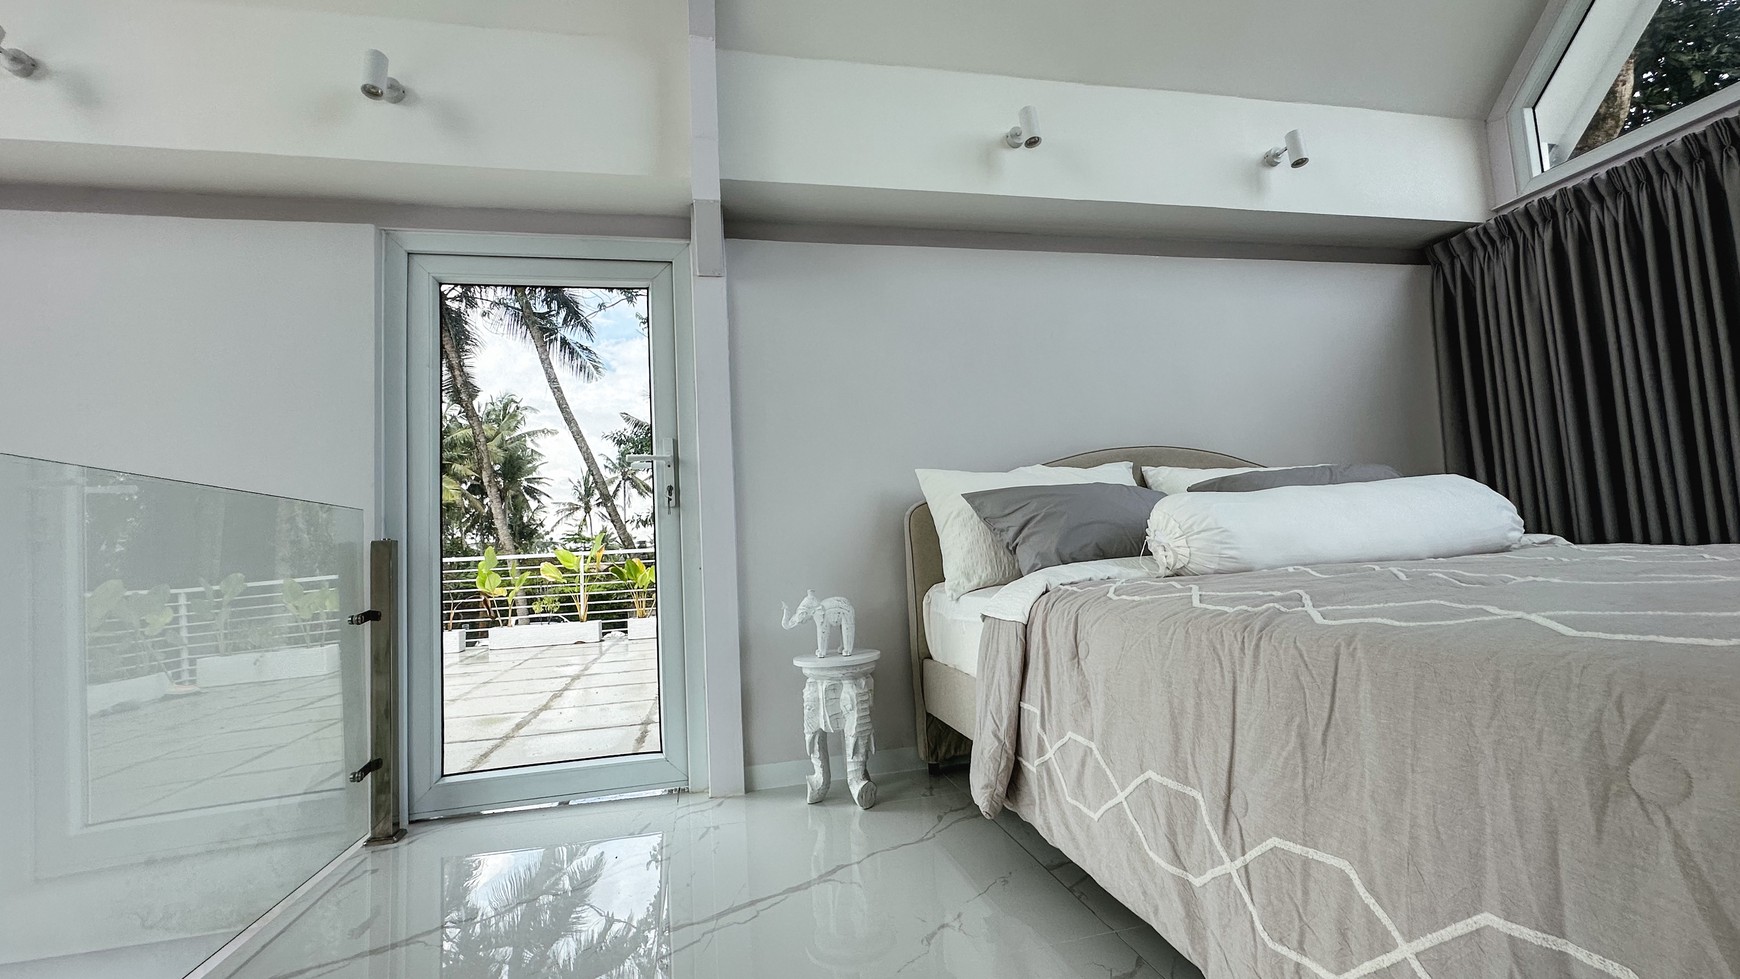 Modern and Bright Villa for Sale in Ubud (Lodtunduh) - A Dreamy White Haven with Spectacular Views